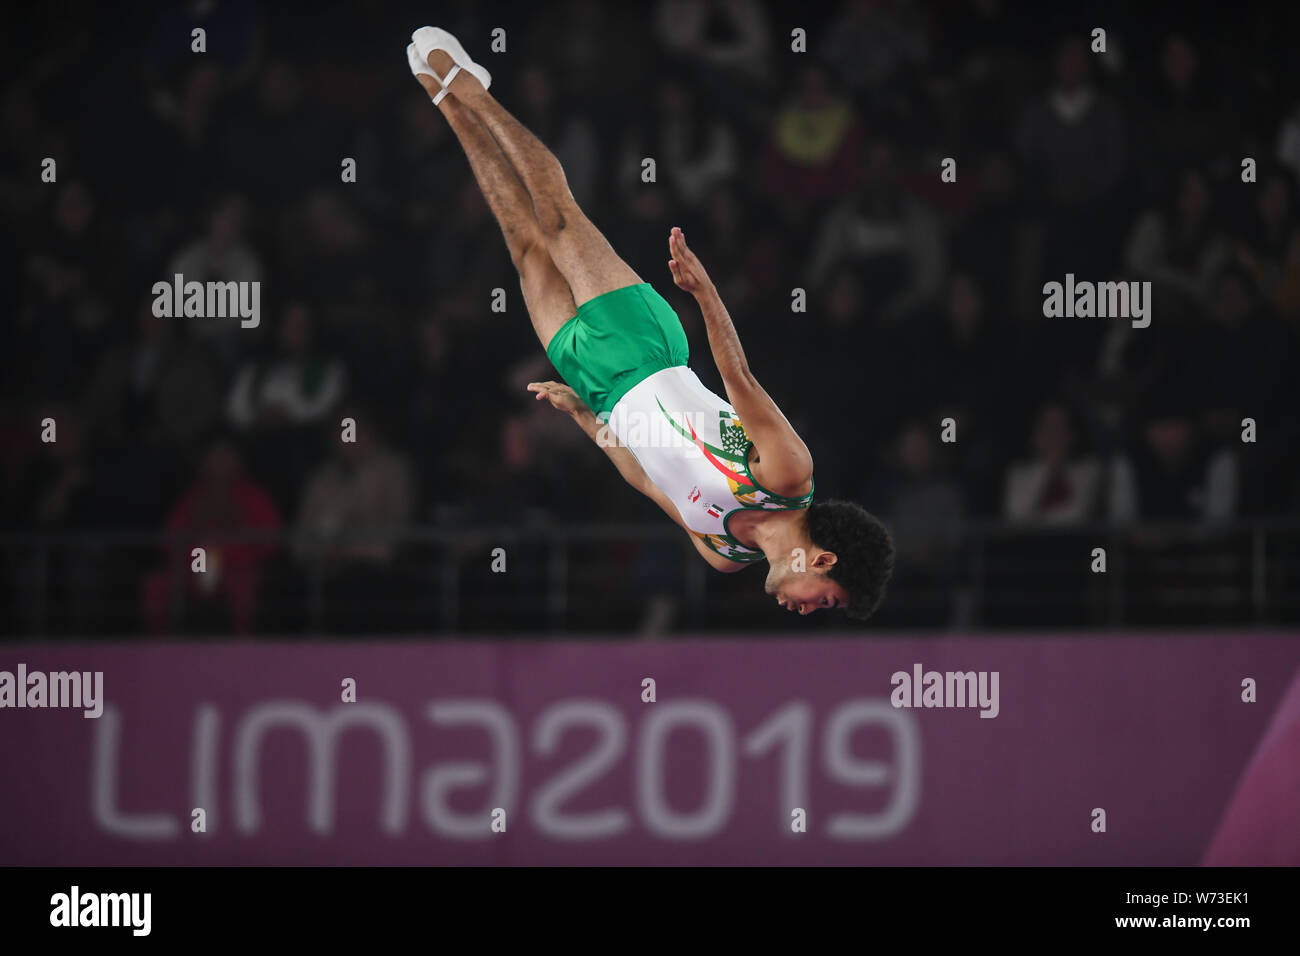 Lima, Peru. 4th Aug, 2019. LUIS LORIA from Mexico flips upside down during the competition held in the Polideportivo Villa El Salvador in Lima, Peru. Credit: Amy Sanderson/ZUMA Wire/Alamy Live News Stock Photo